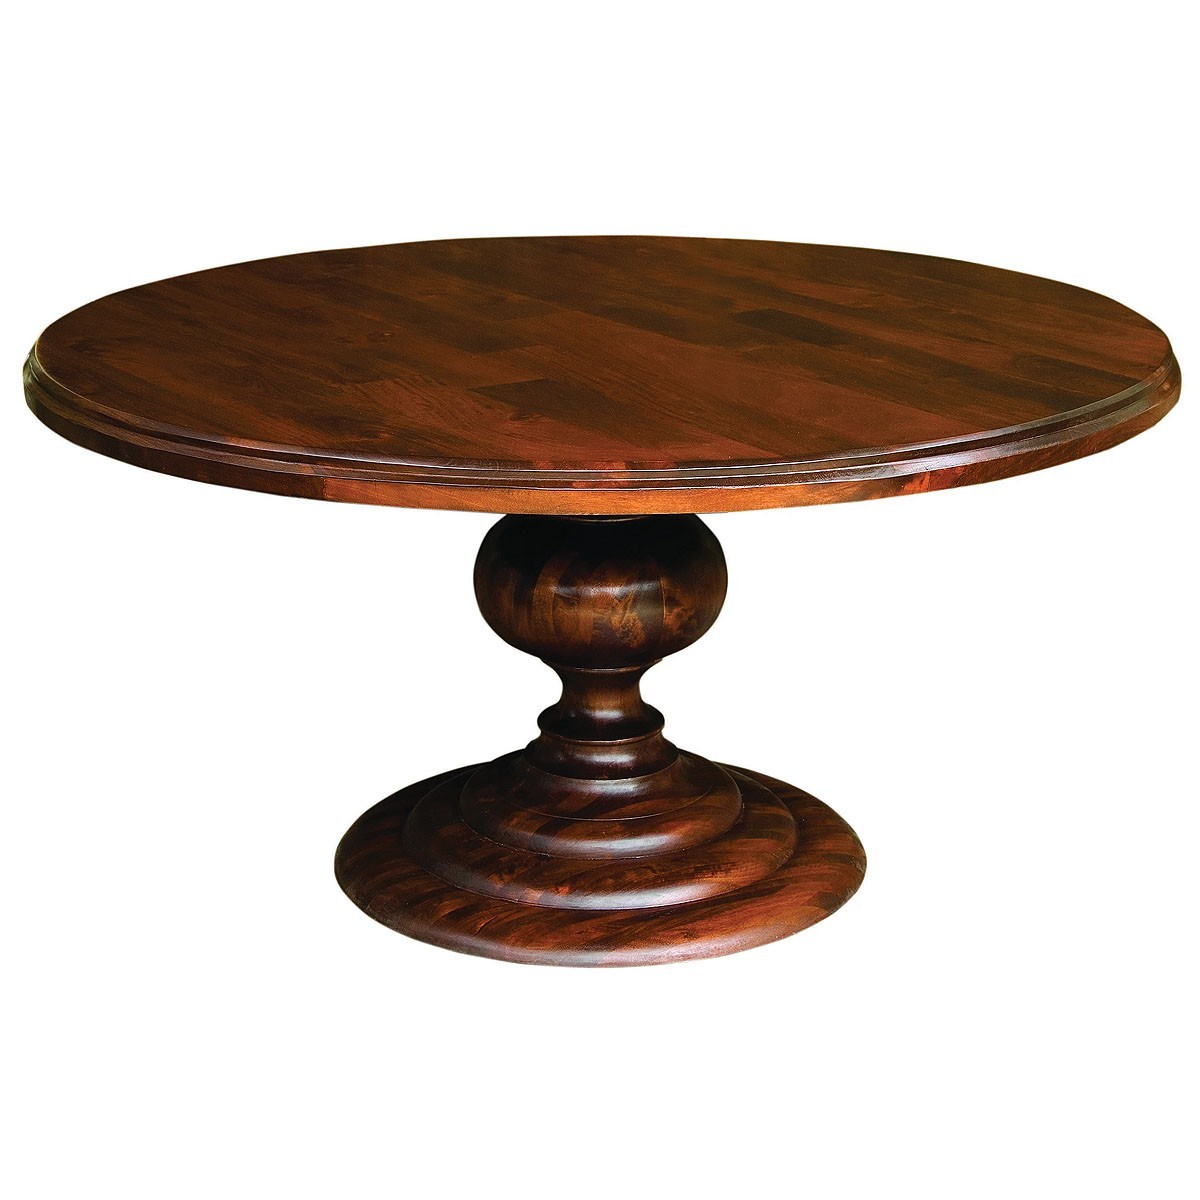 1200x1200px 9 Popular 60 Inch Round Pedestal Dining Table Picture in Furniture